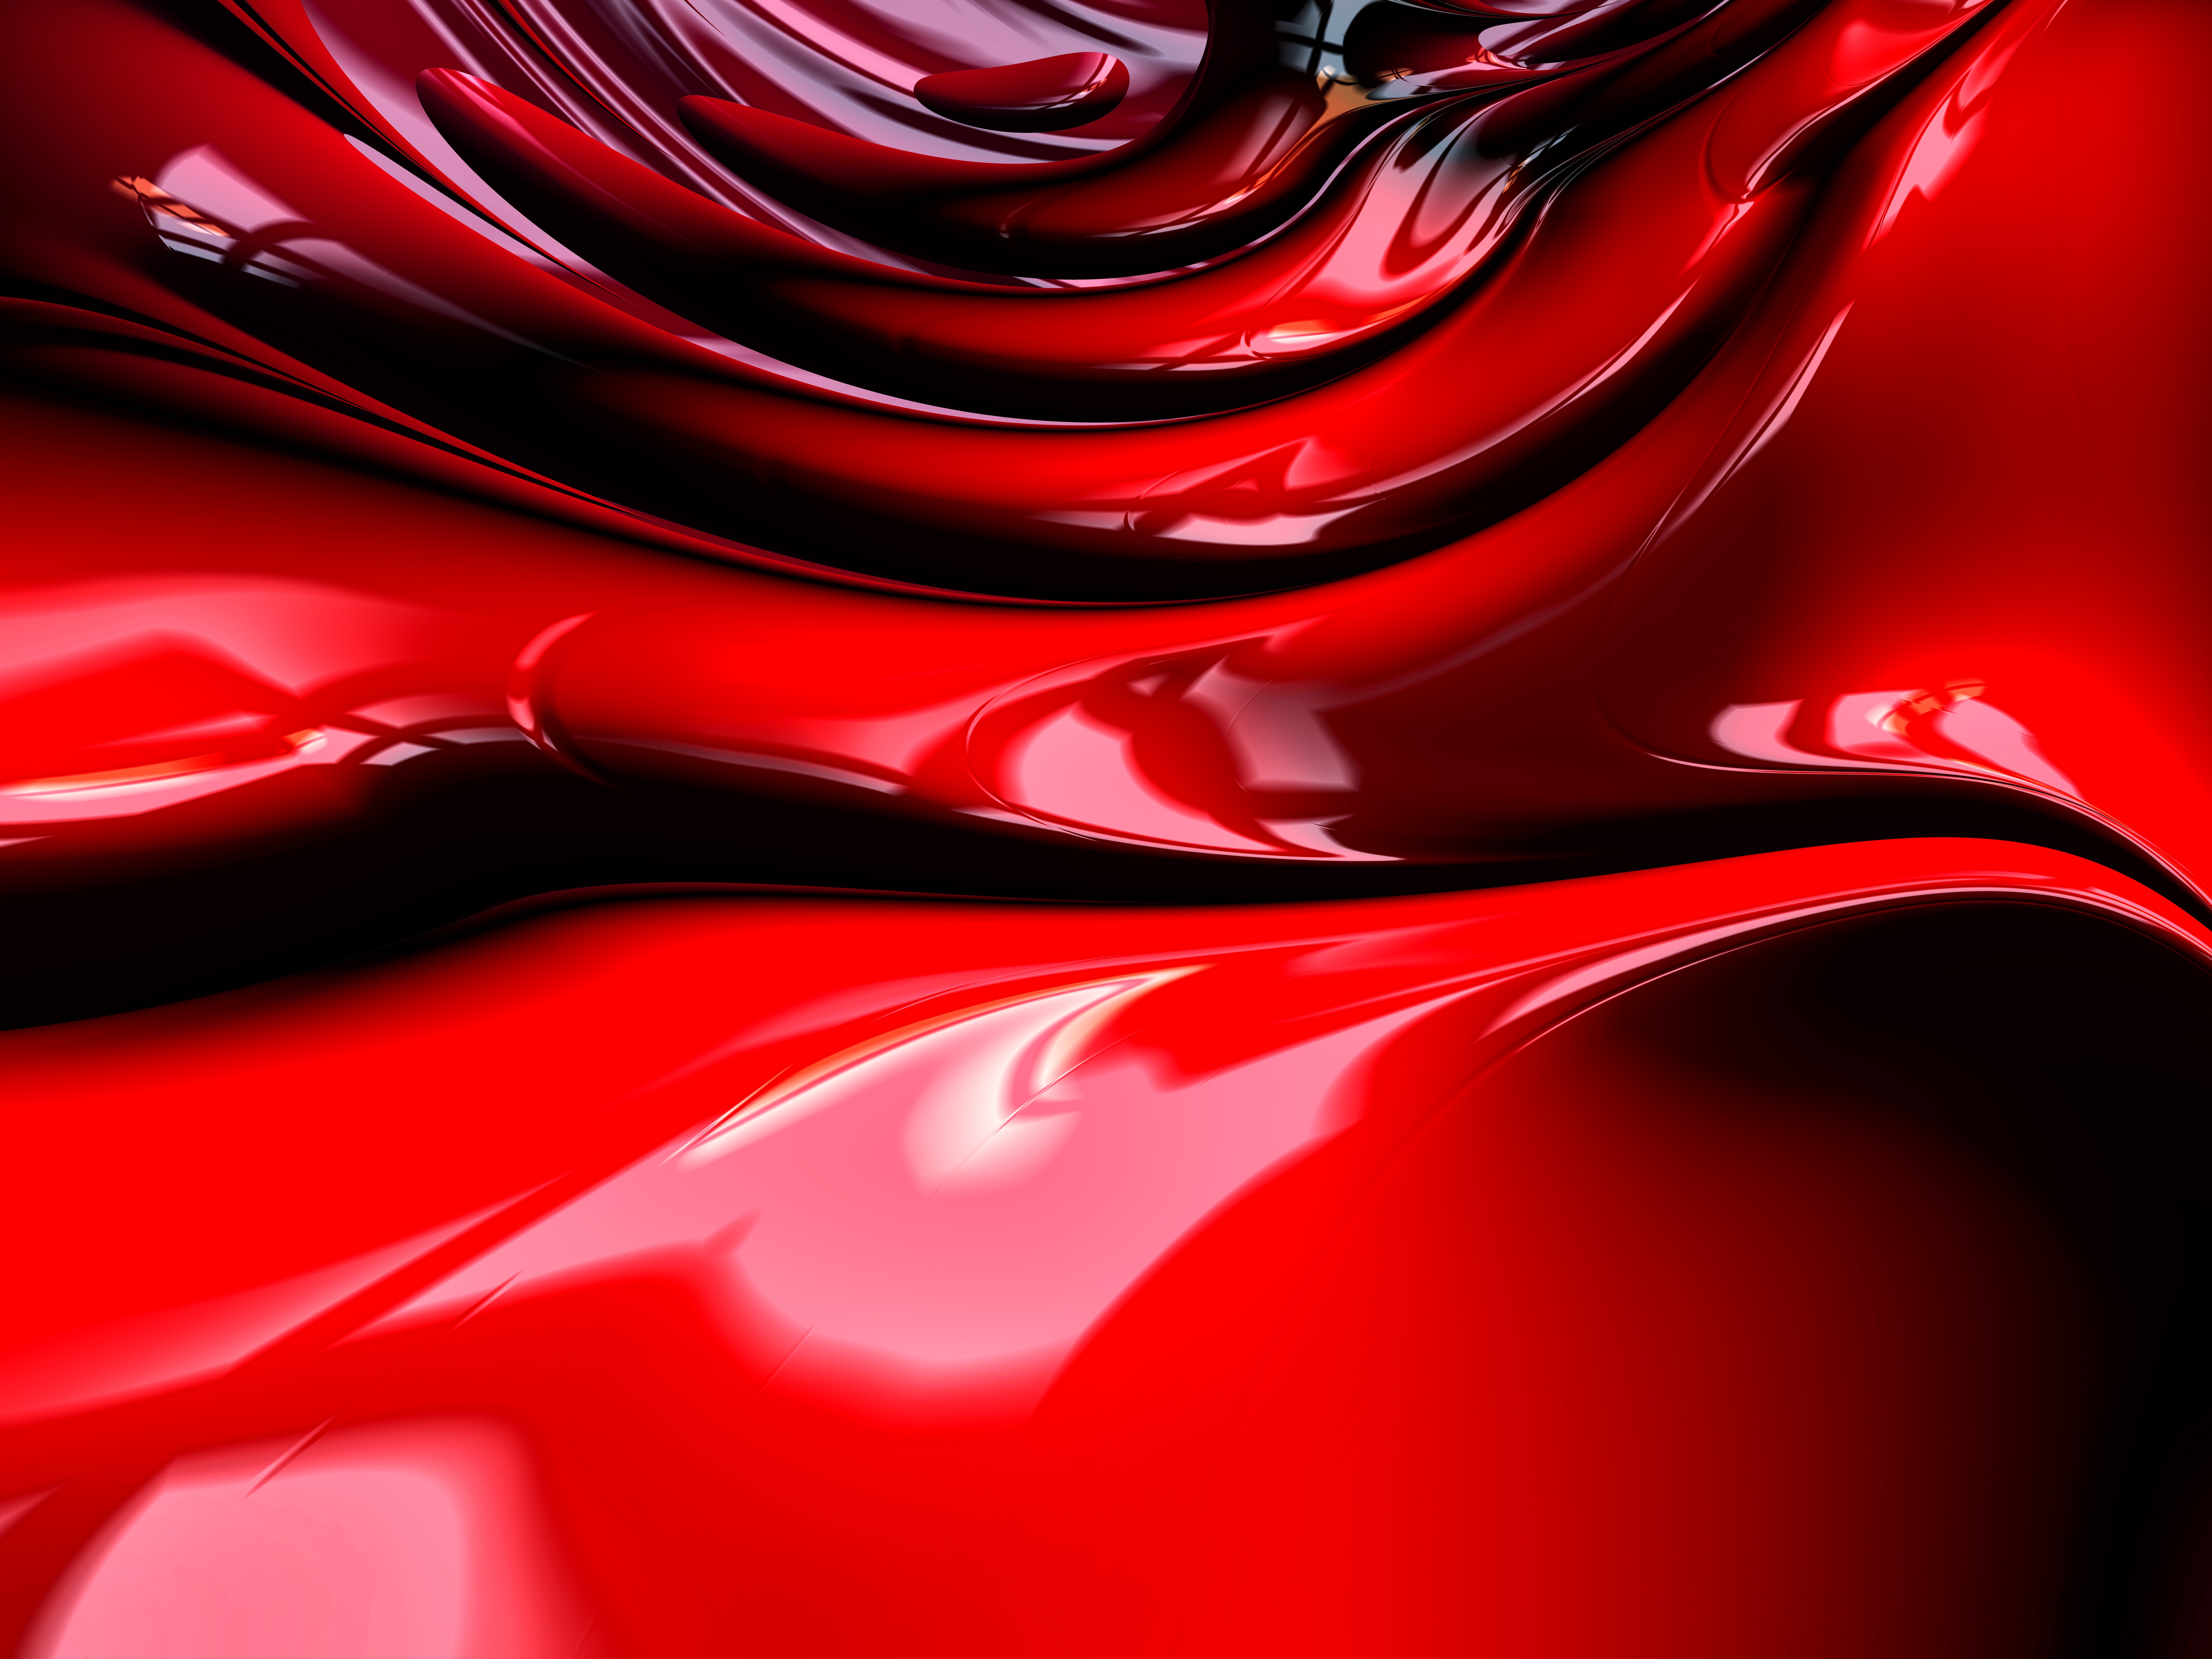 53011 download wallpaper 3d, surface, fractal, red, structure, form, forms screensavers and pictures for free